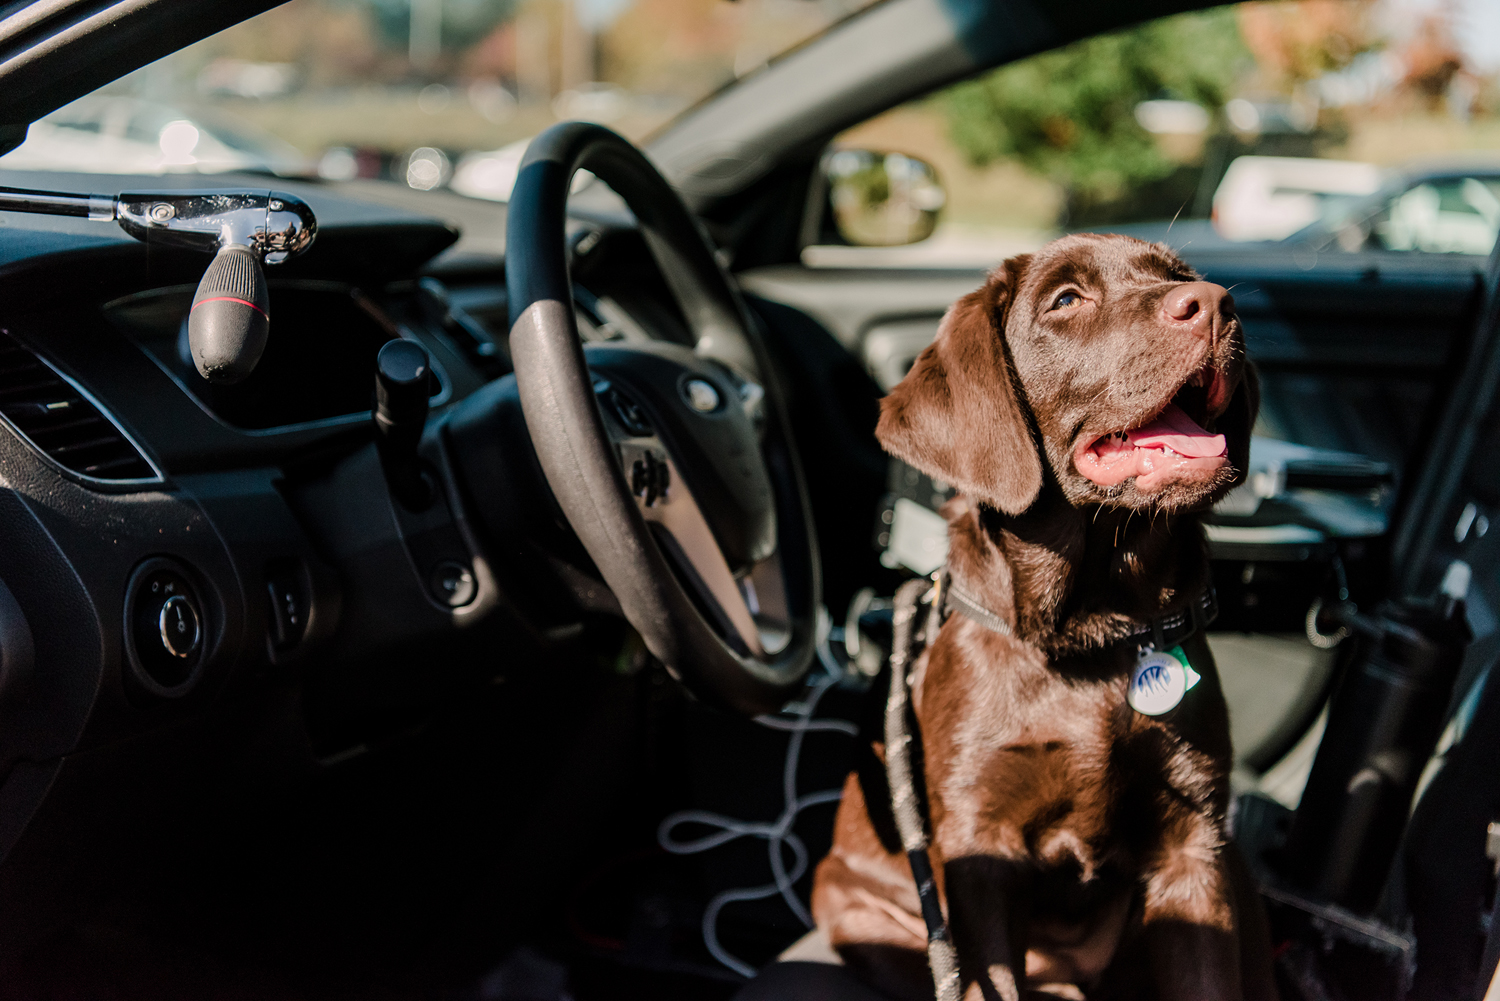 UMBC Police comfort dog Chip sits in the driver's seat of a car